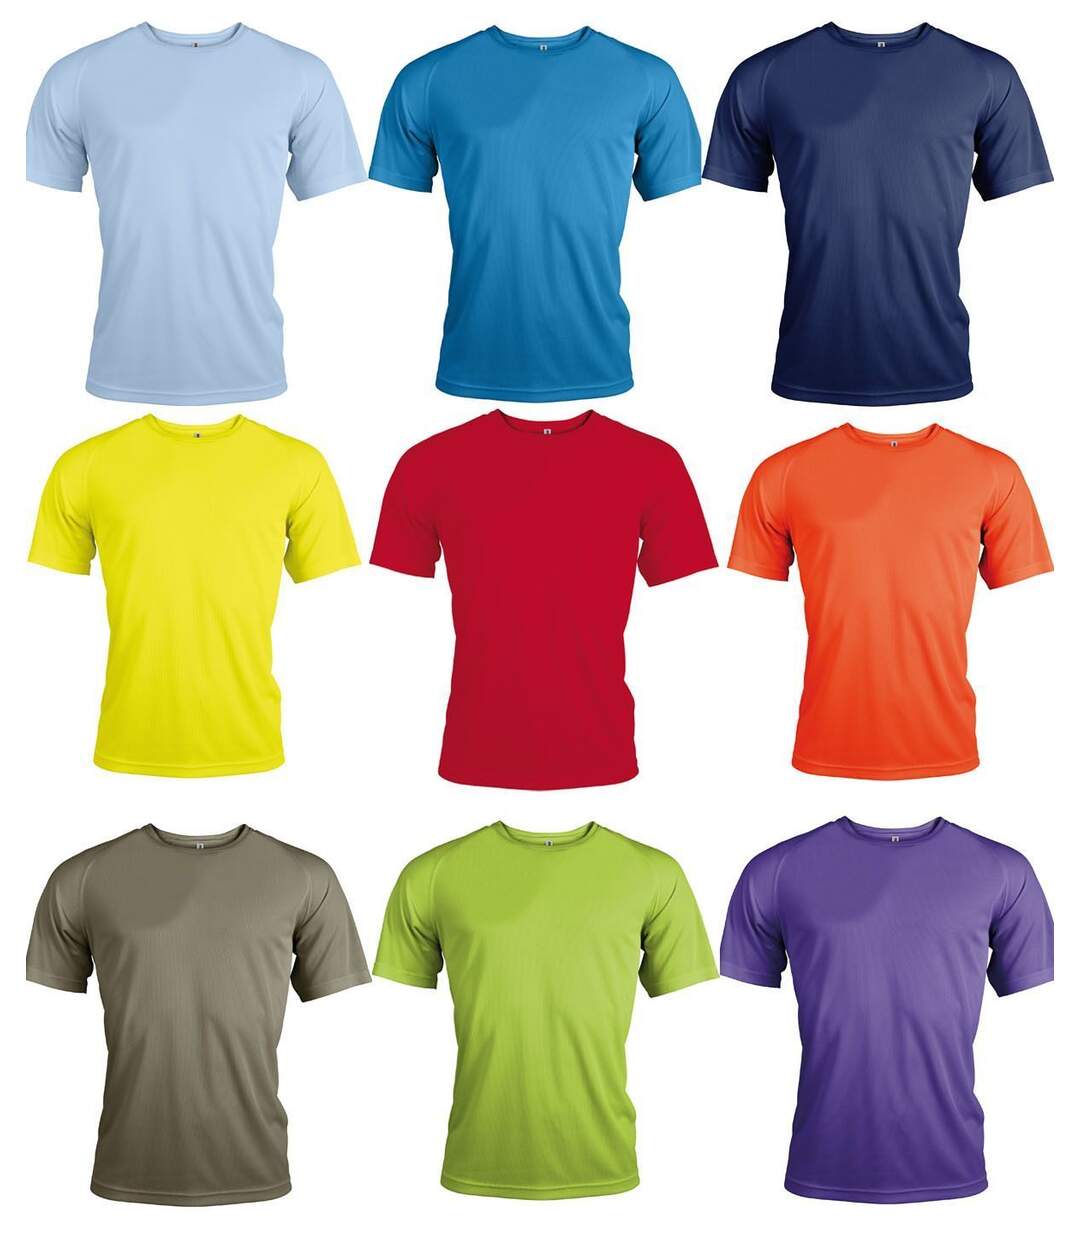 Lot 9 maillots sports - running - manches courtes - Homme - multicolores